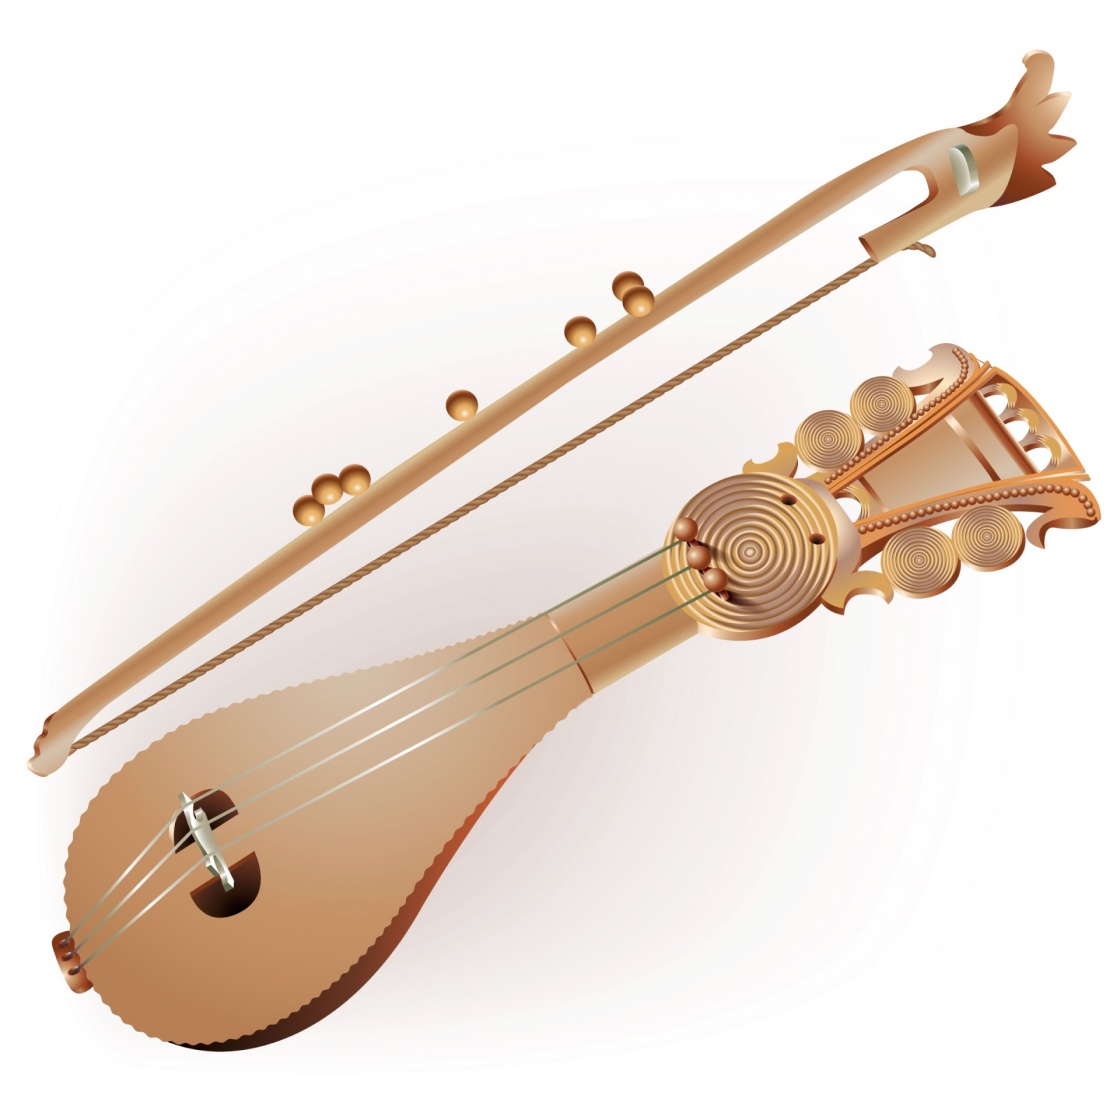 'Musical instruments series. Traditional Cretan lyra, isolated on white background. Vector illustration' - Crete